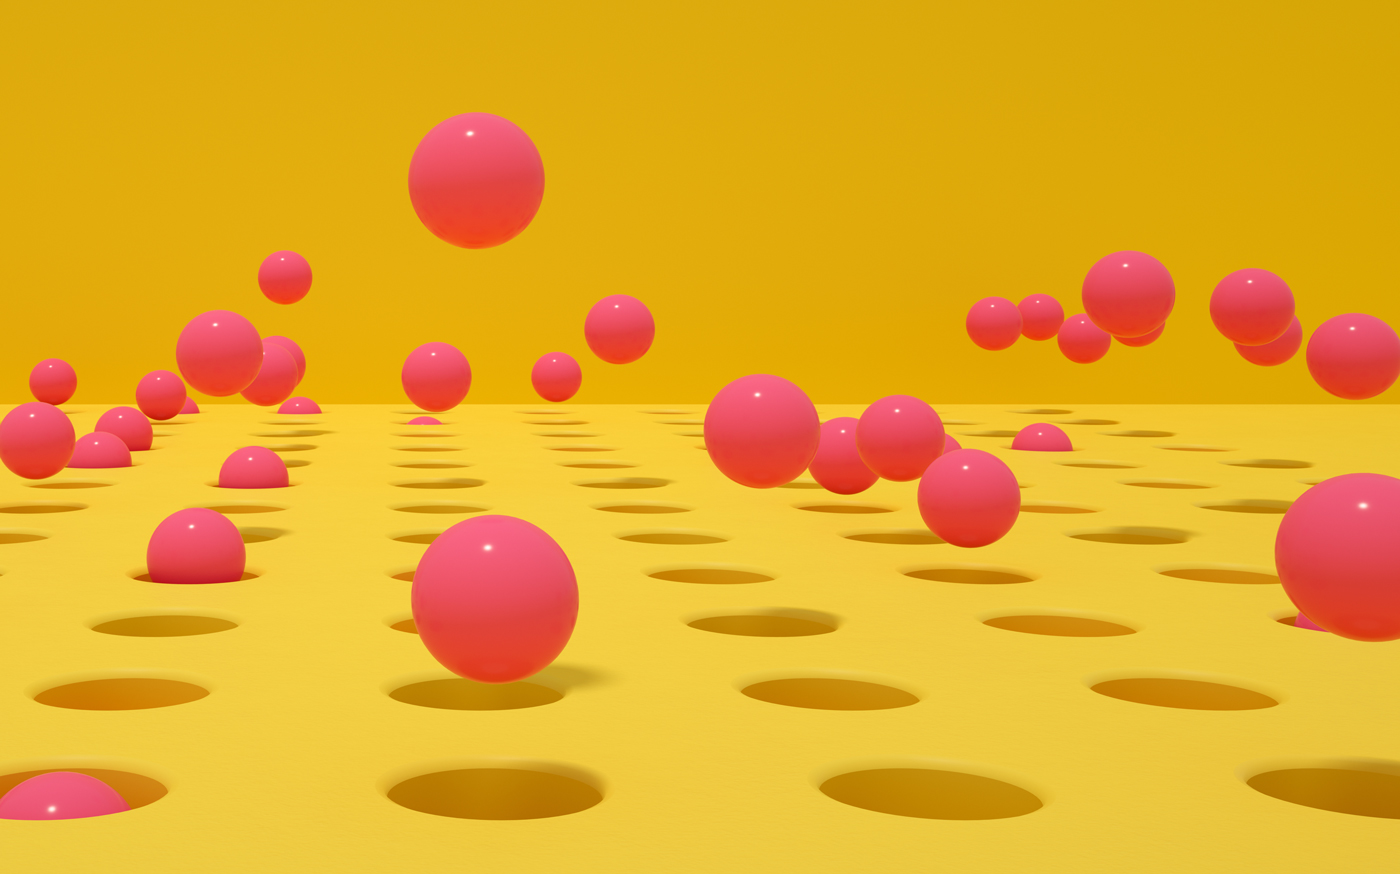 3D Spheres and Holes